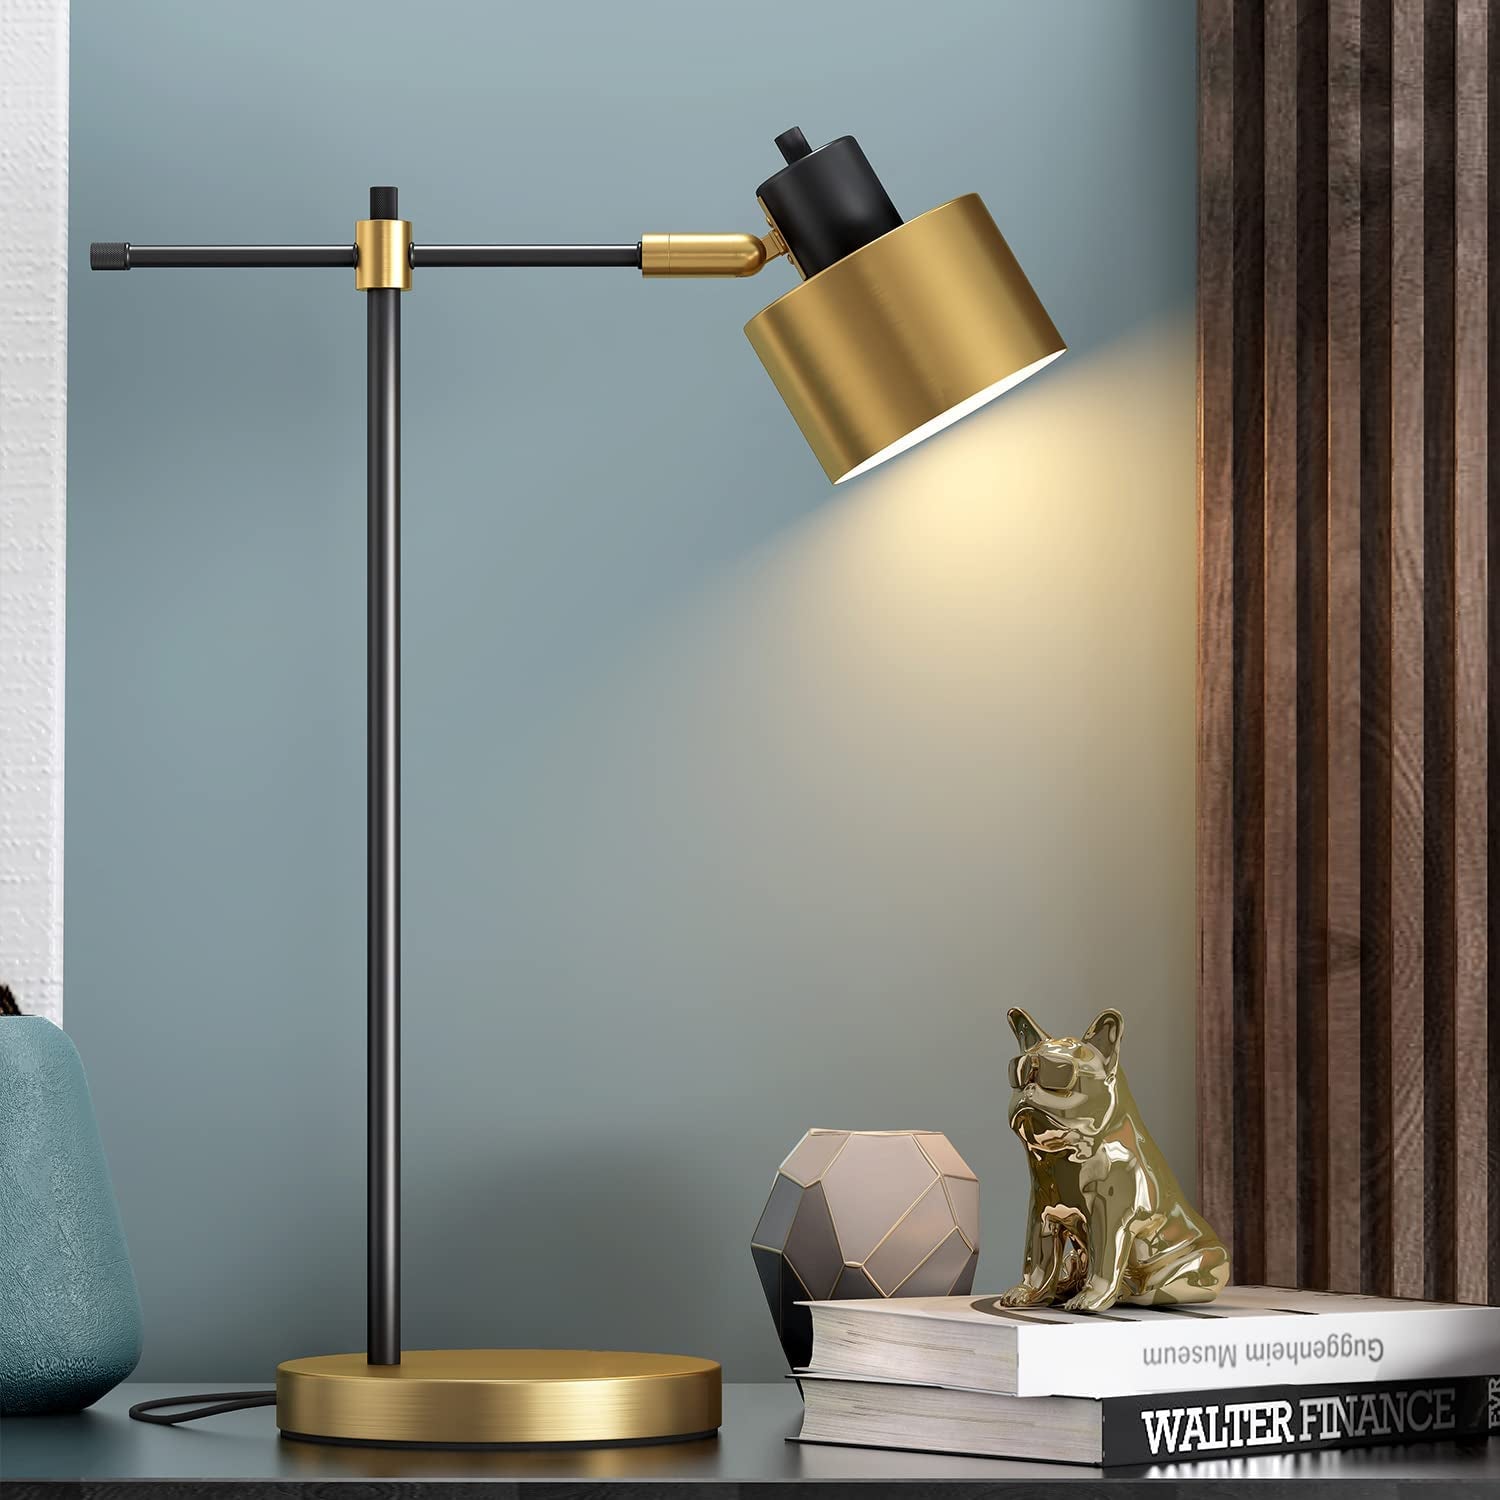 Modern Industrial Desk Lamp for Reading LED 22.25“ Metal Table Lamp Light for Office Bedroom Study Room Living Room Nightstand Bedside Lamps Gold and Matte Black Accent Finish 5W Bulb Included